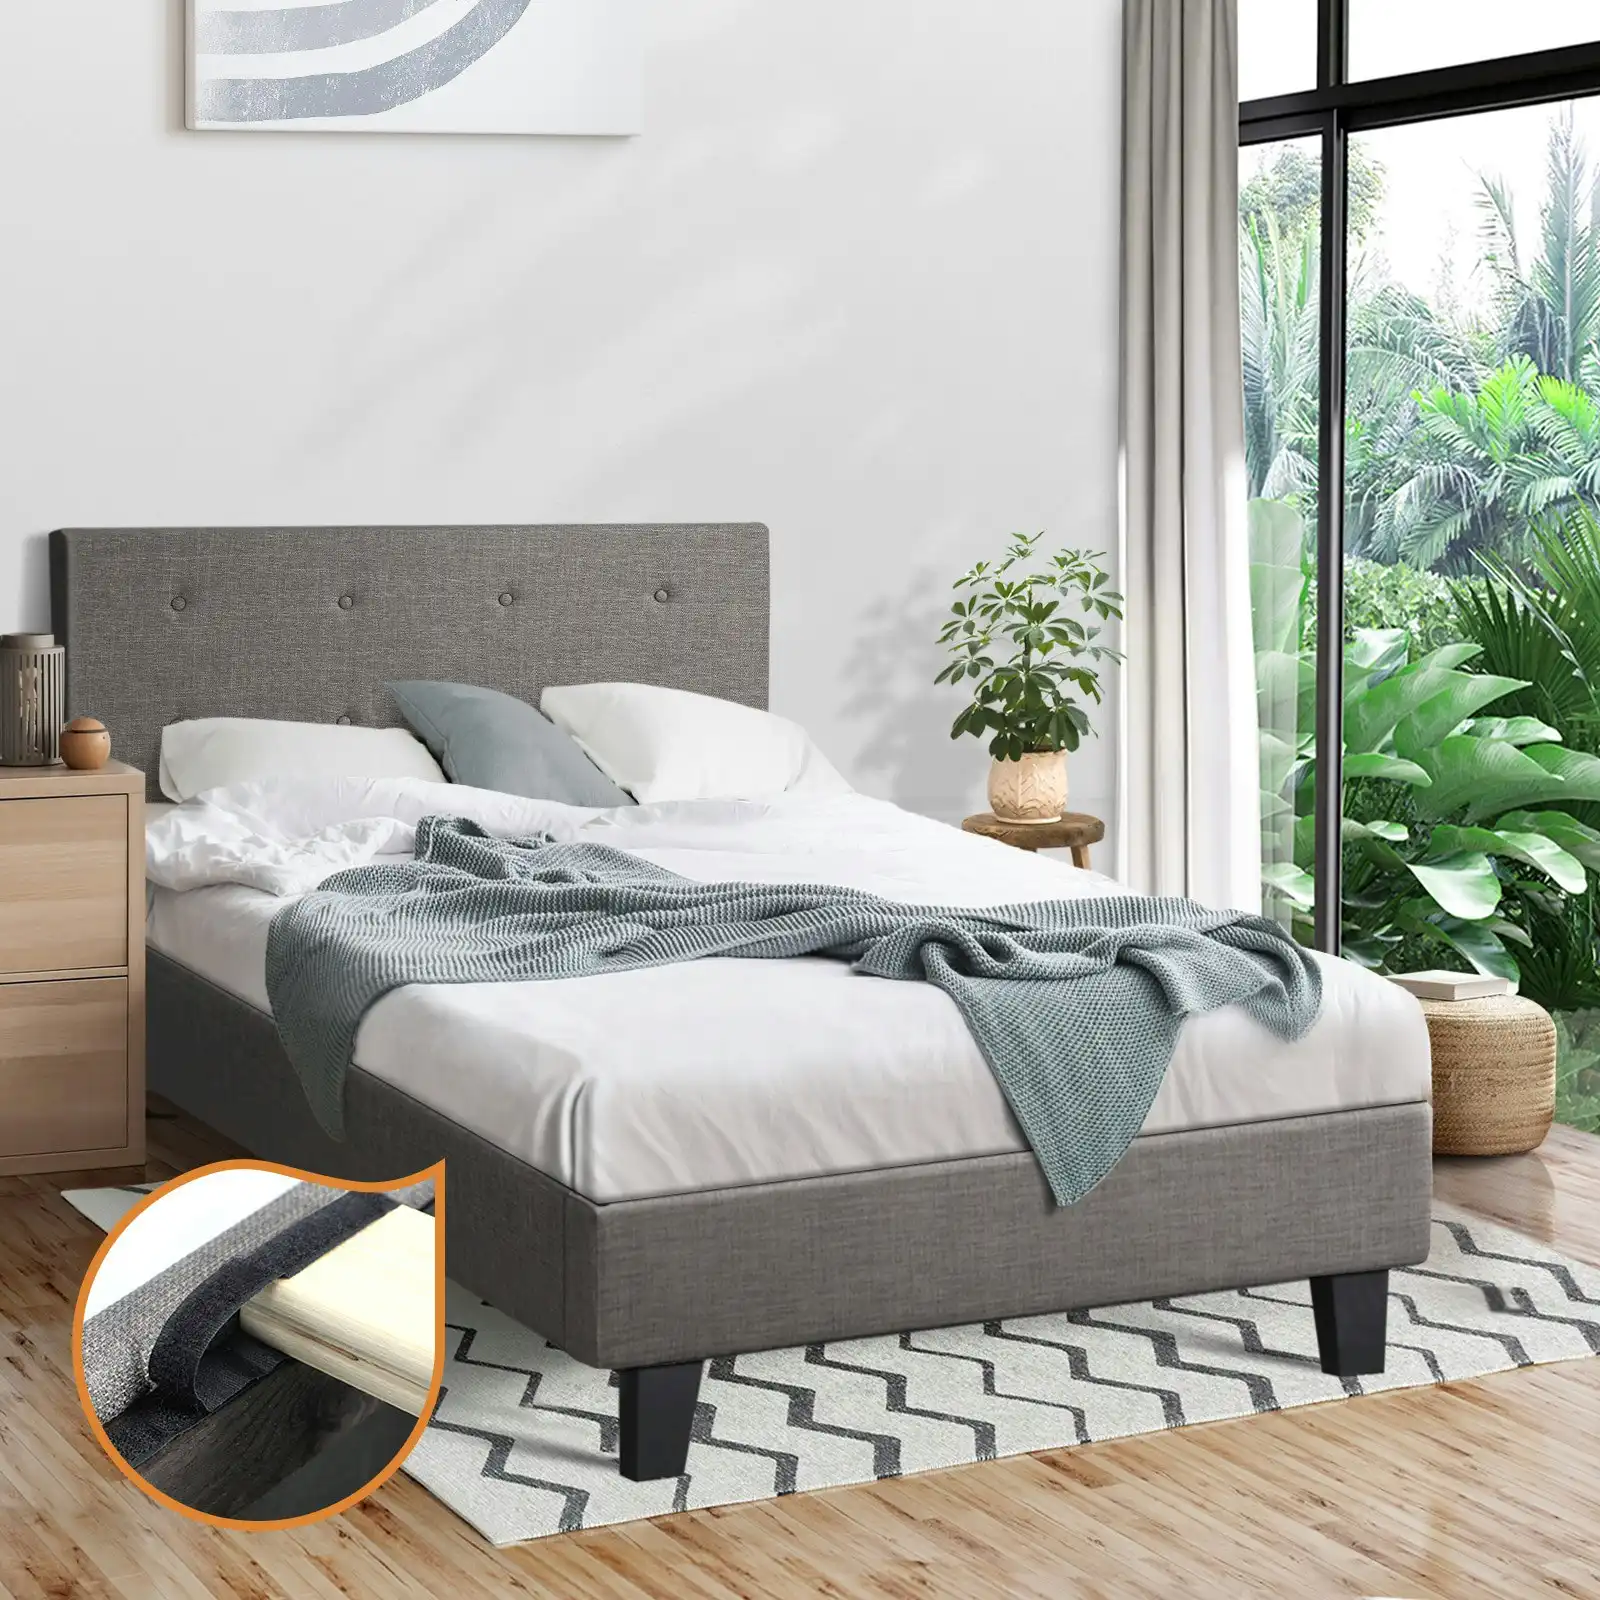 Oikiture Bed Frame King Single Bed Platform Wooden Fabric Grey